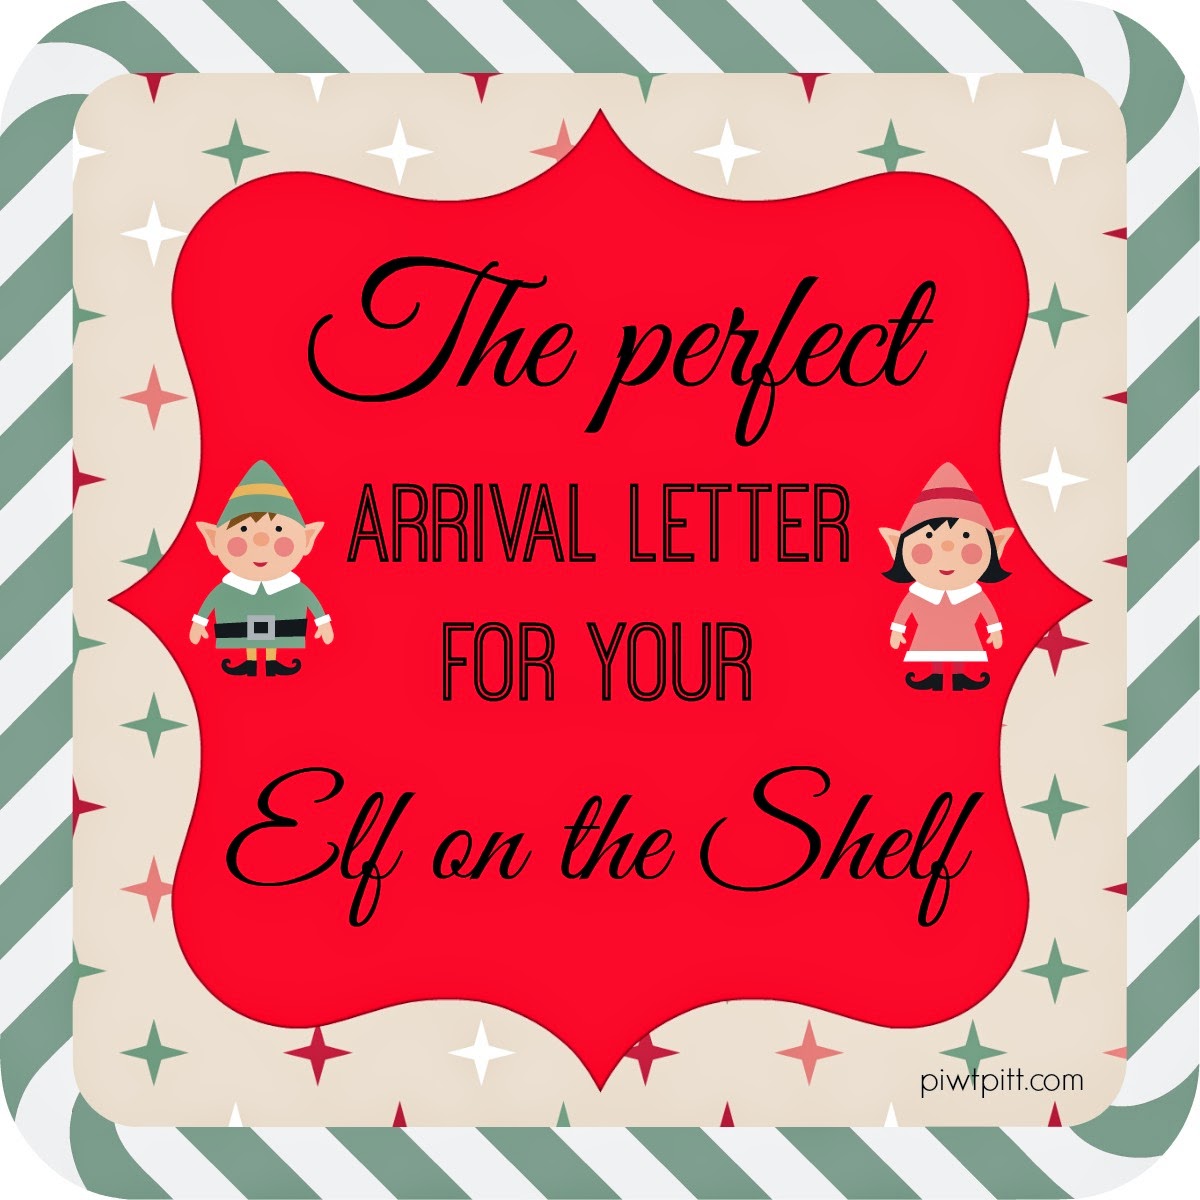 people-i-want-to-punch-in-the-throat-the-perfect-arrival-letter-for